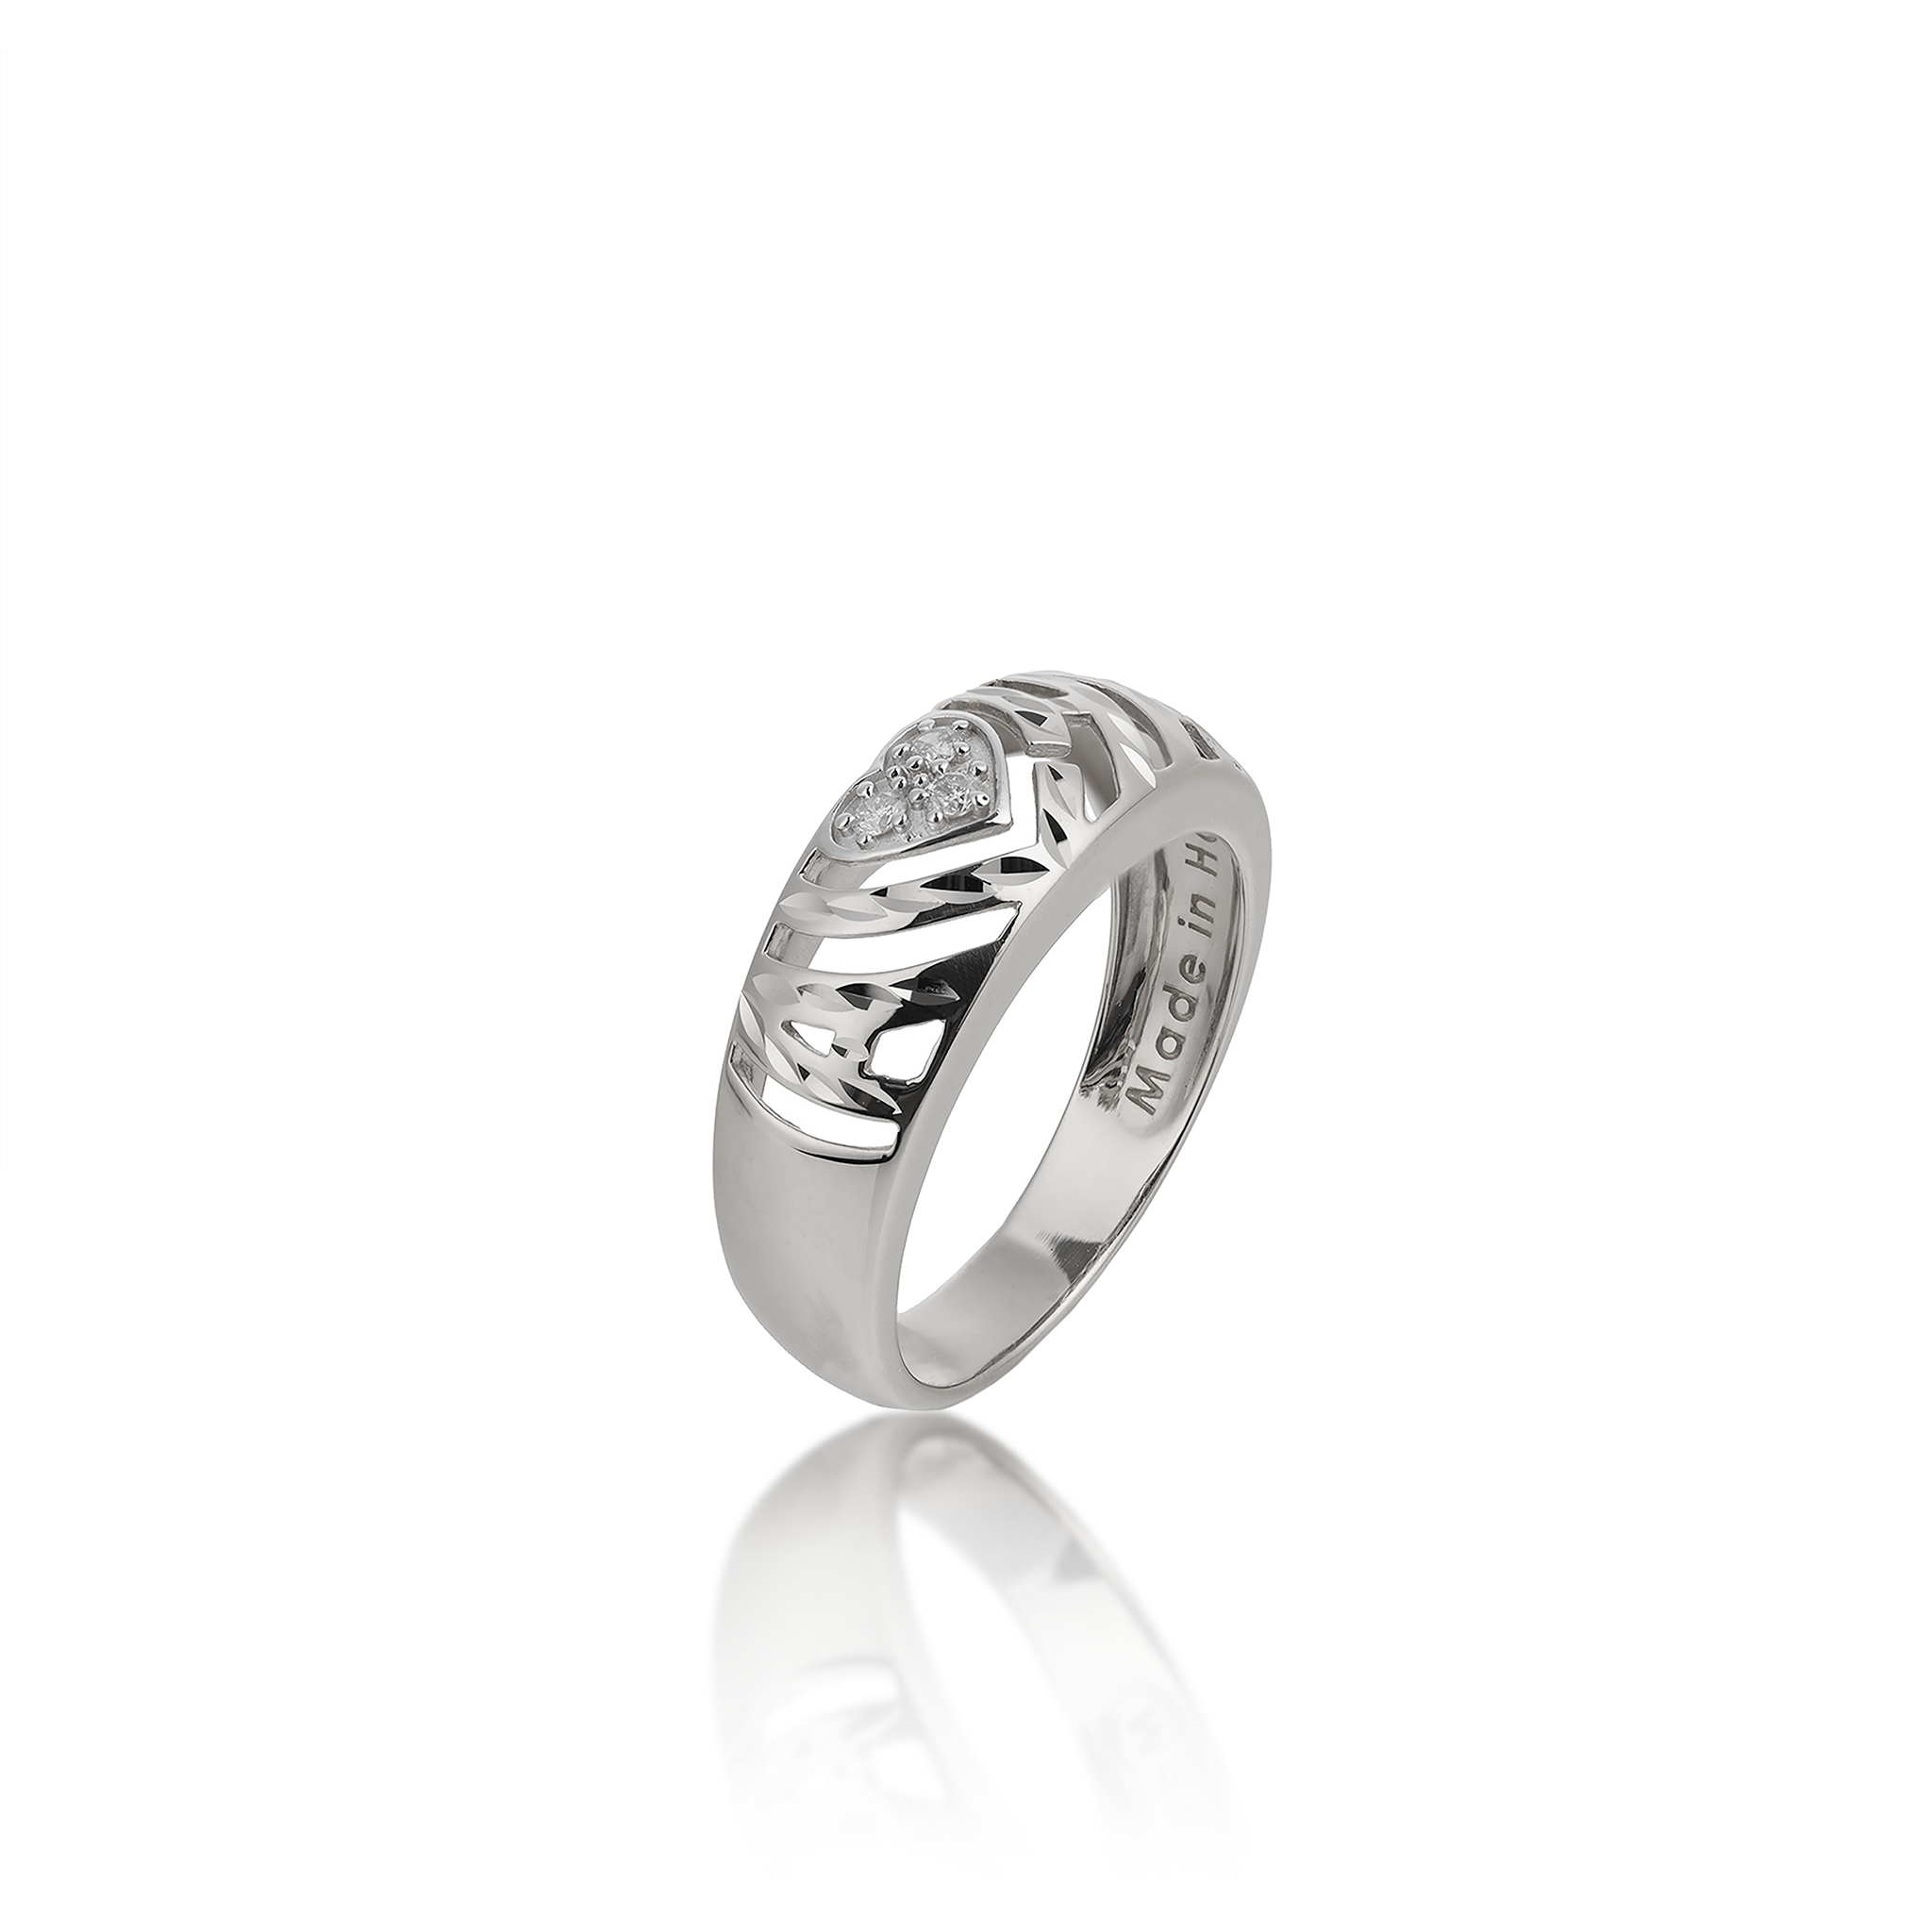 Aloha Heart Ring in White Gold with Diamonds - 8mm